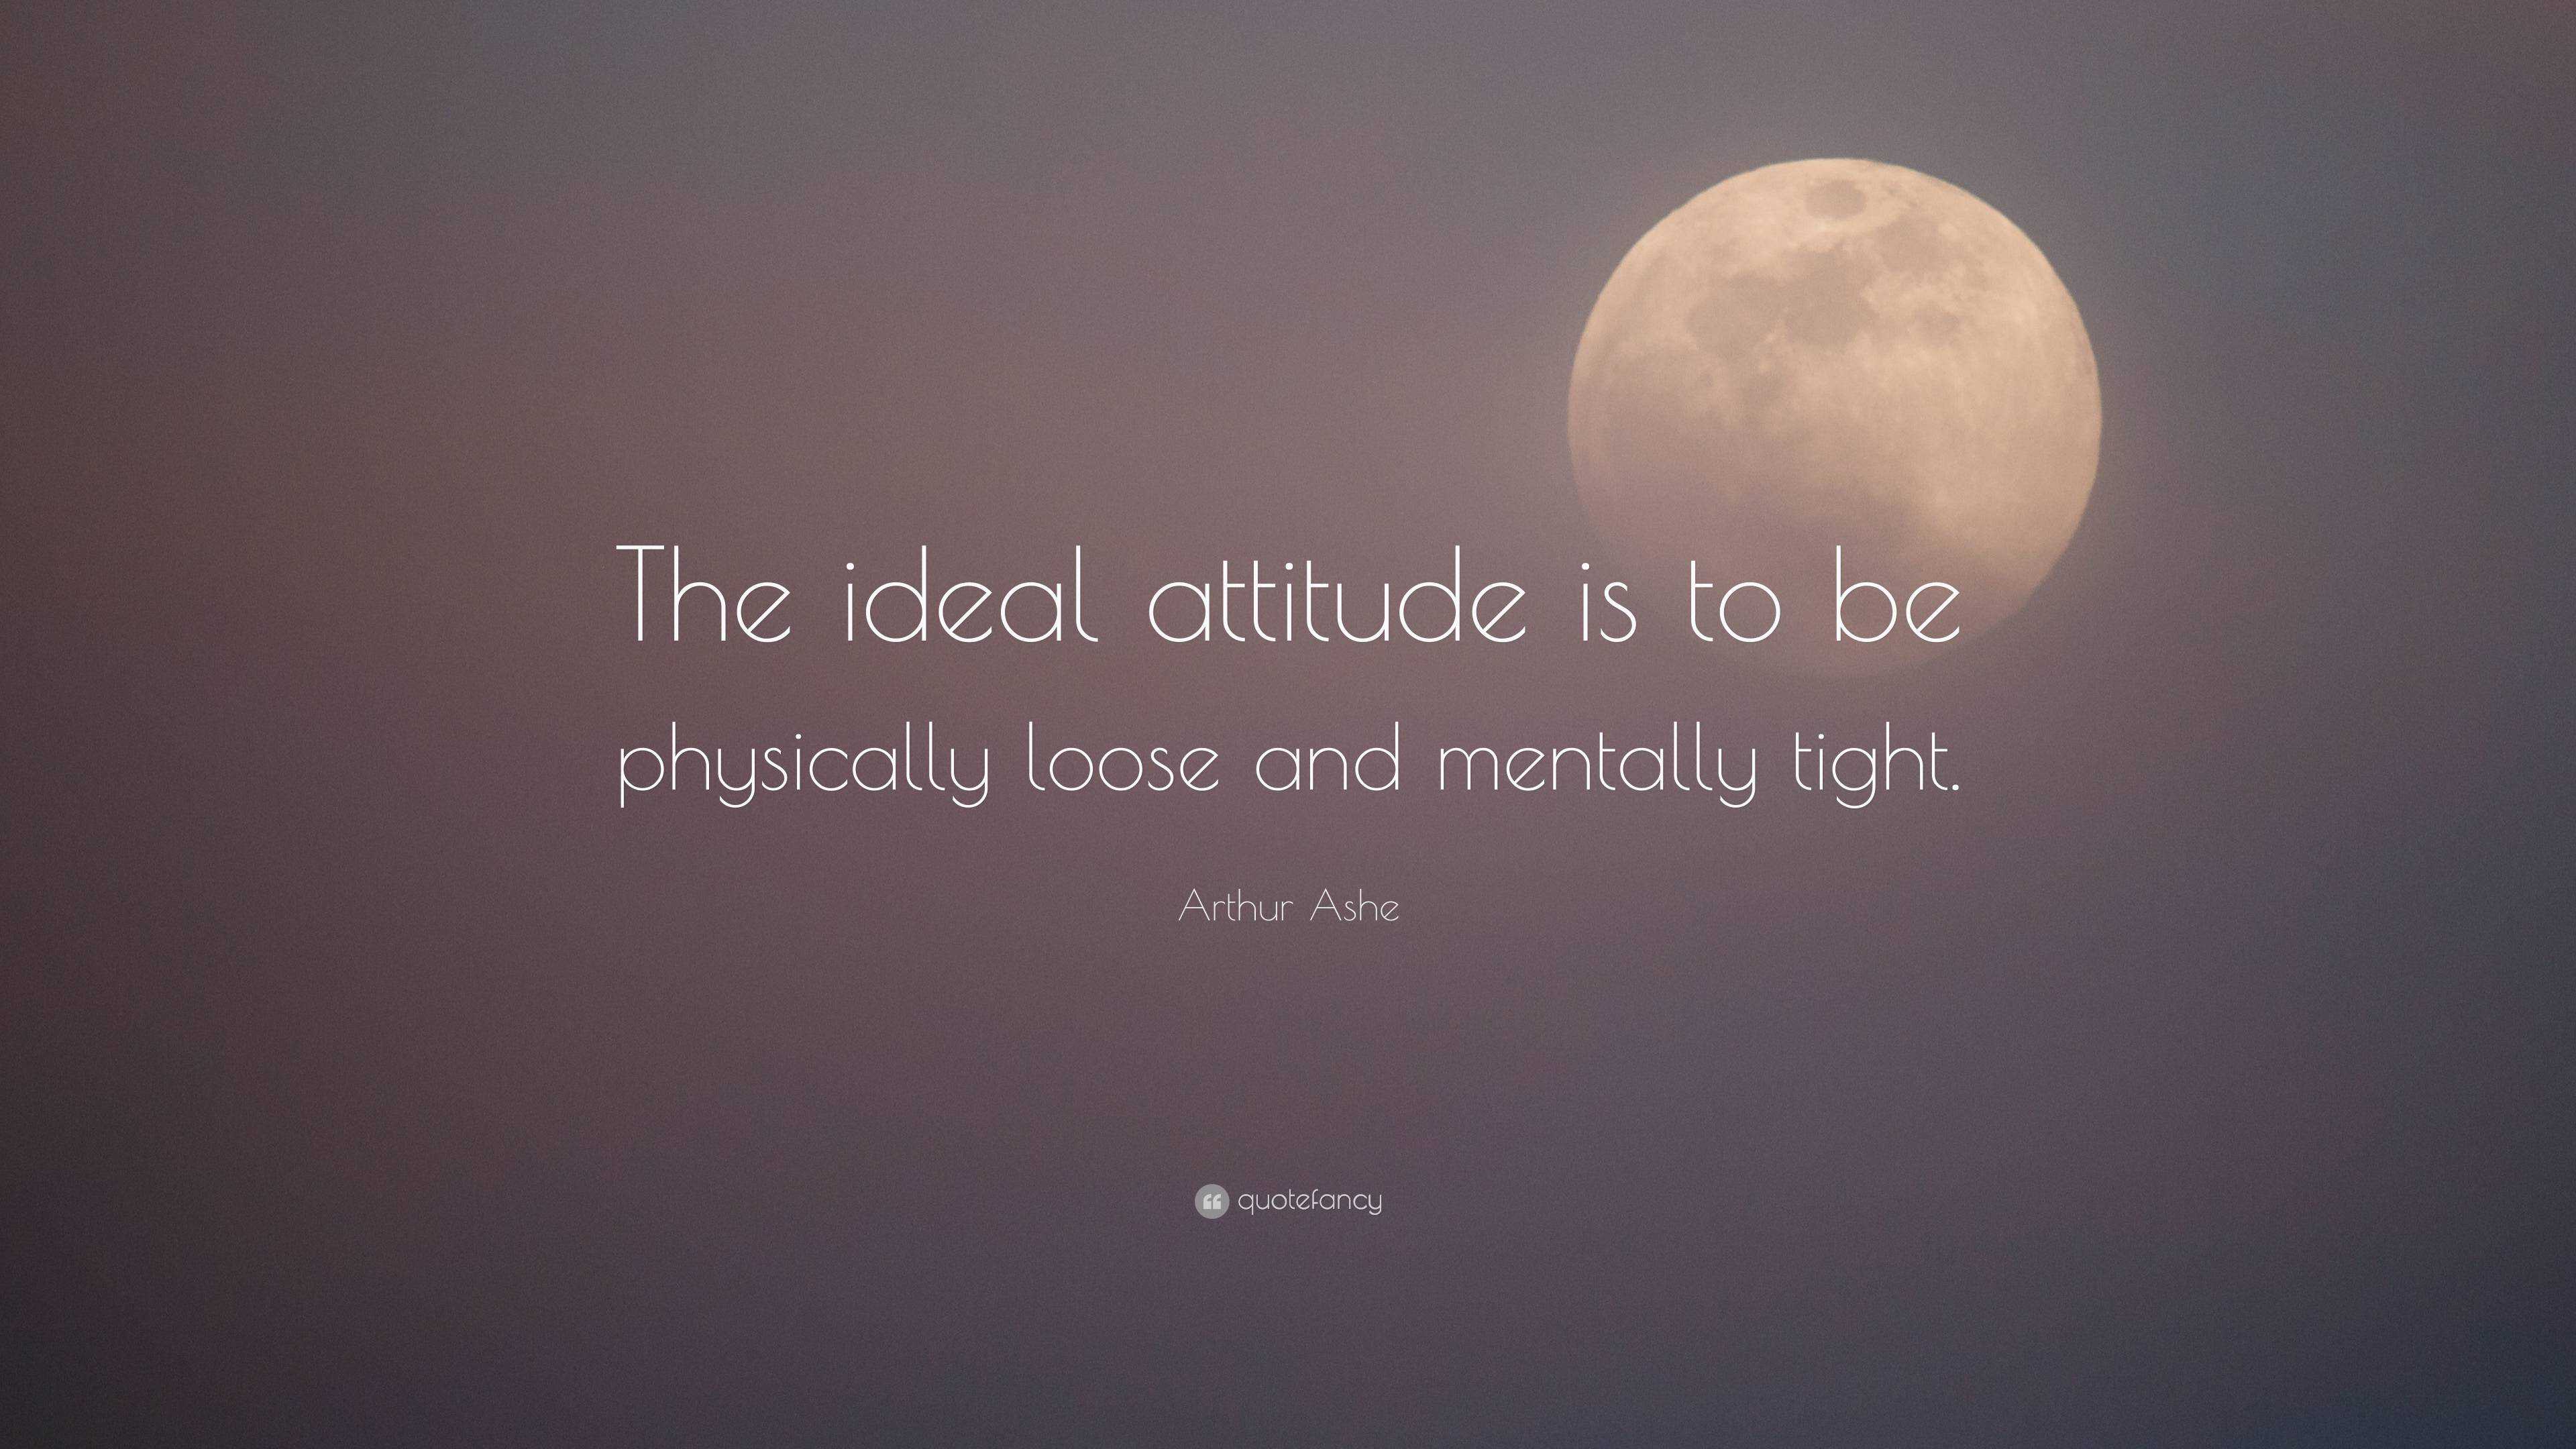 6470274 Arthur Ashe Quote The ideal attitude is to be physically loose and